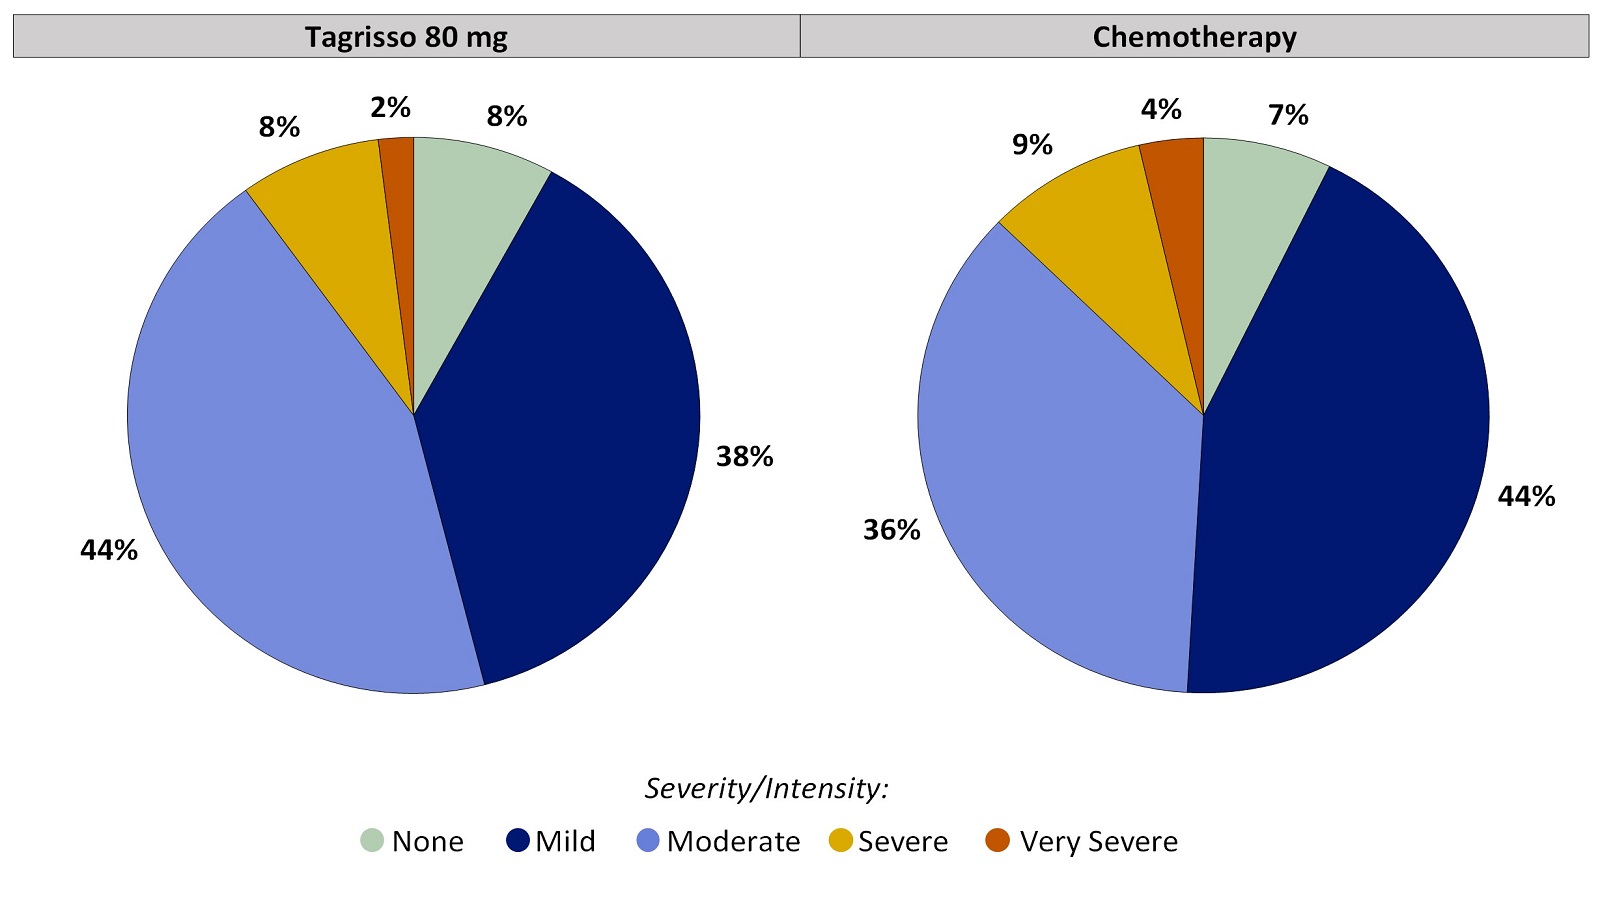 Two pie charts, one for Tagrisso and the other for chemotherapy, summarizing the percentage of patients by worst reported dry skin during the first 24 weeks of the clinical trial. In the Tagrisso arm, None (8%), Mild (38%), Moderate (44%), Severe (8%) and Very severe (2%). In the chemotherapy arm, None (7%), Mild (44%), Moderate (36%), Severe (9%) and Very severe (4%).